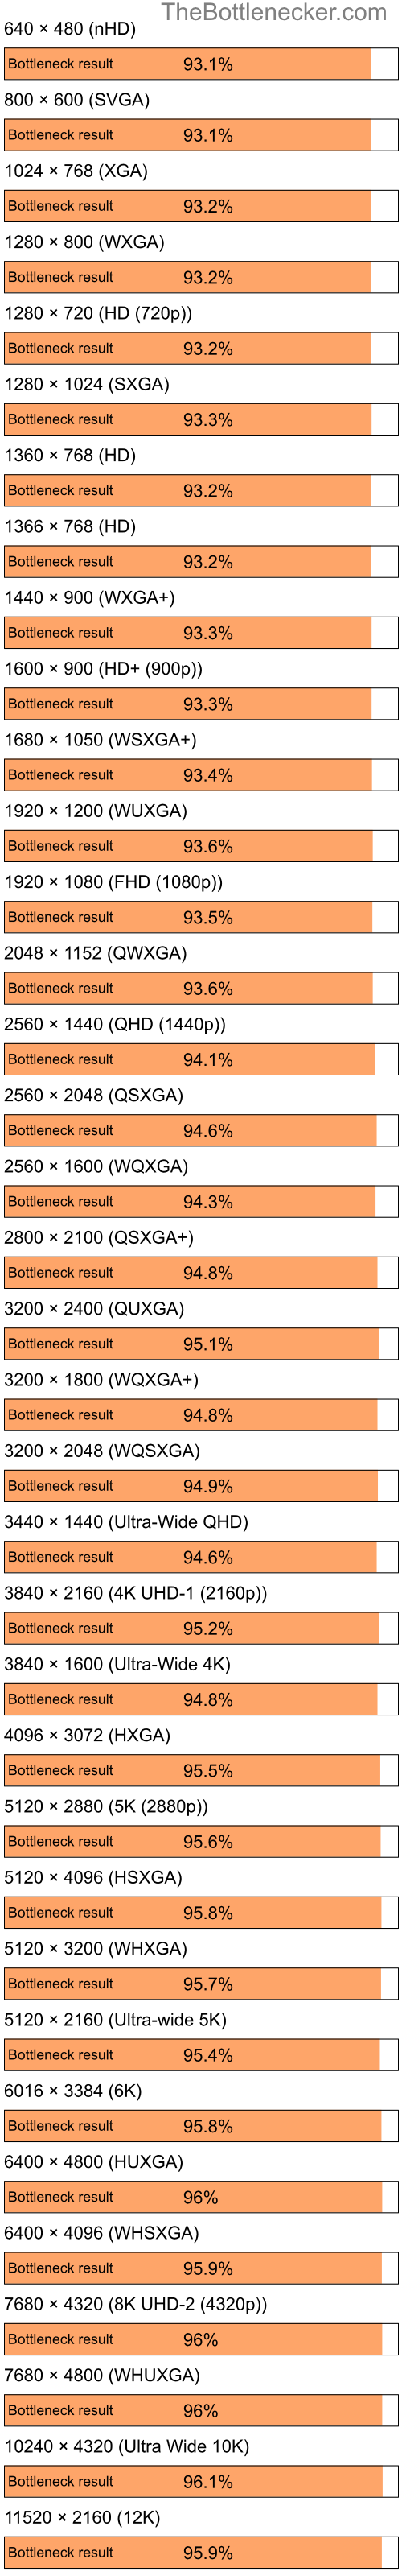 Bottleneck results by resolution for Intel Pentium 4 and AMD Mobility Radeon 9200 in Graphic Card Intense Tasks